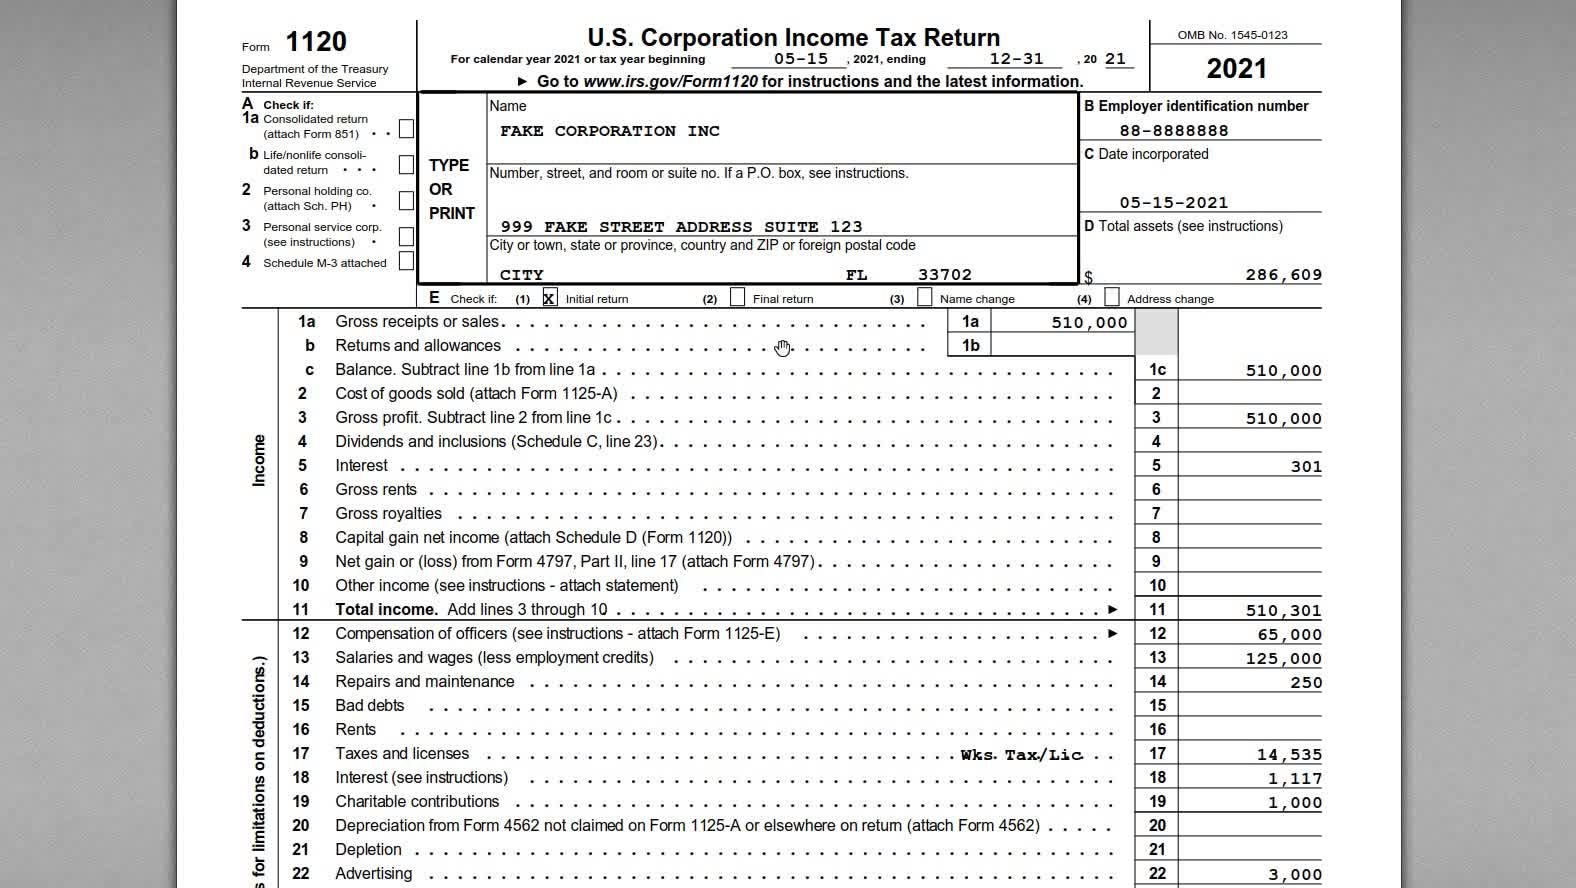 How to Fill Out Form 1120 for 2021. Step-by-Step Instructions